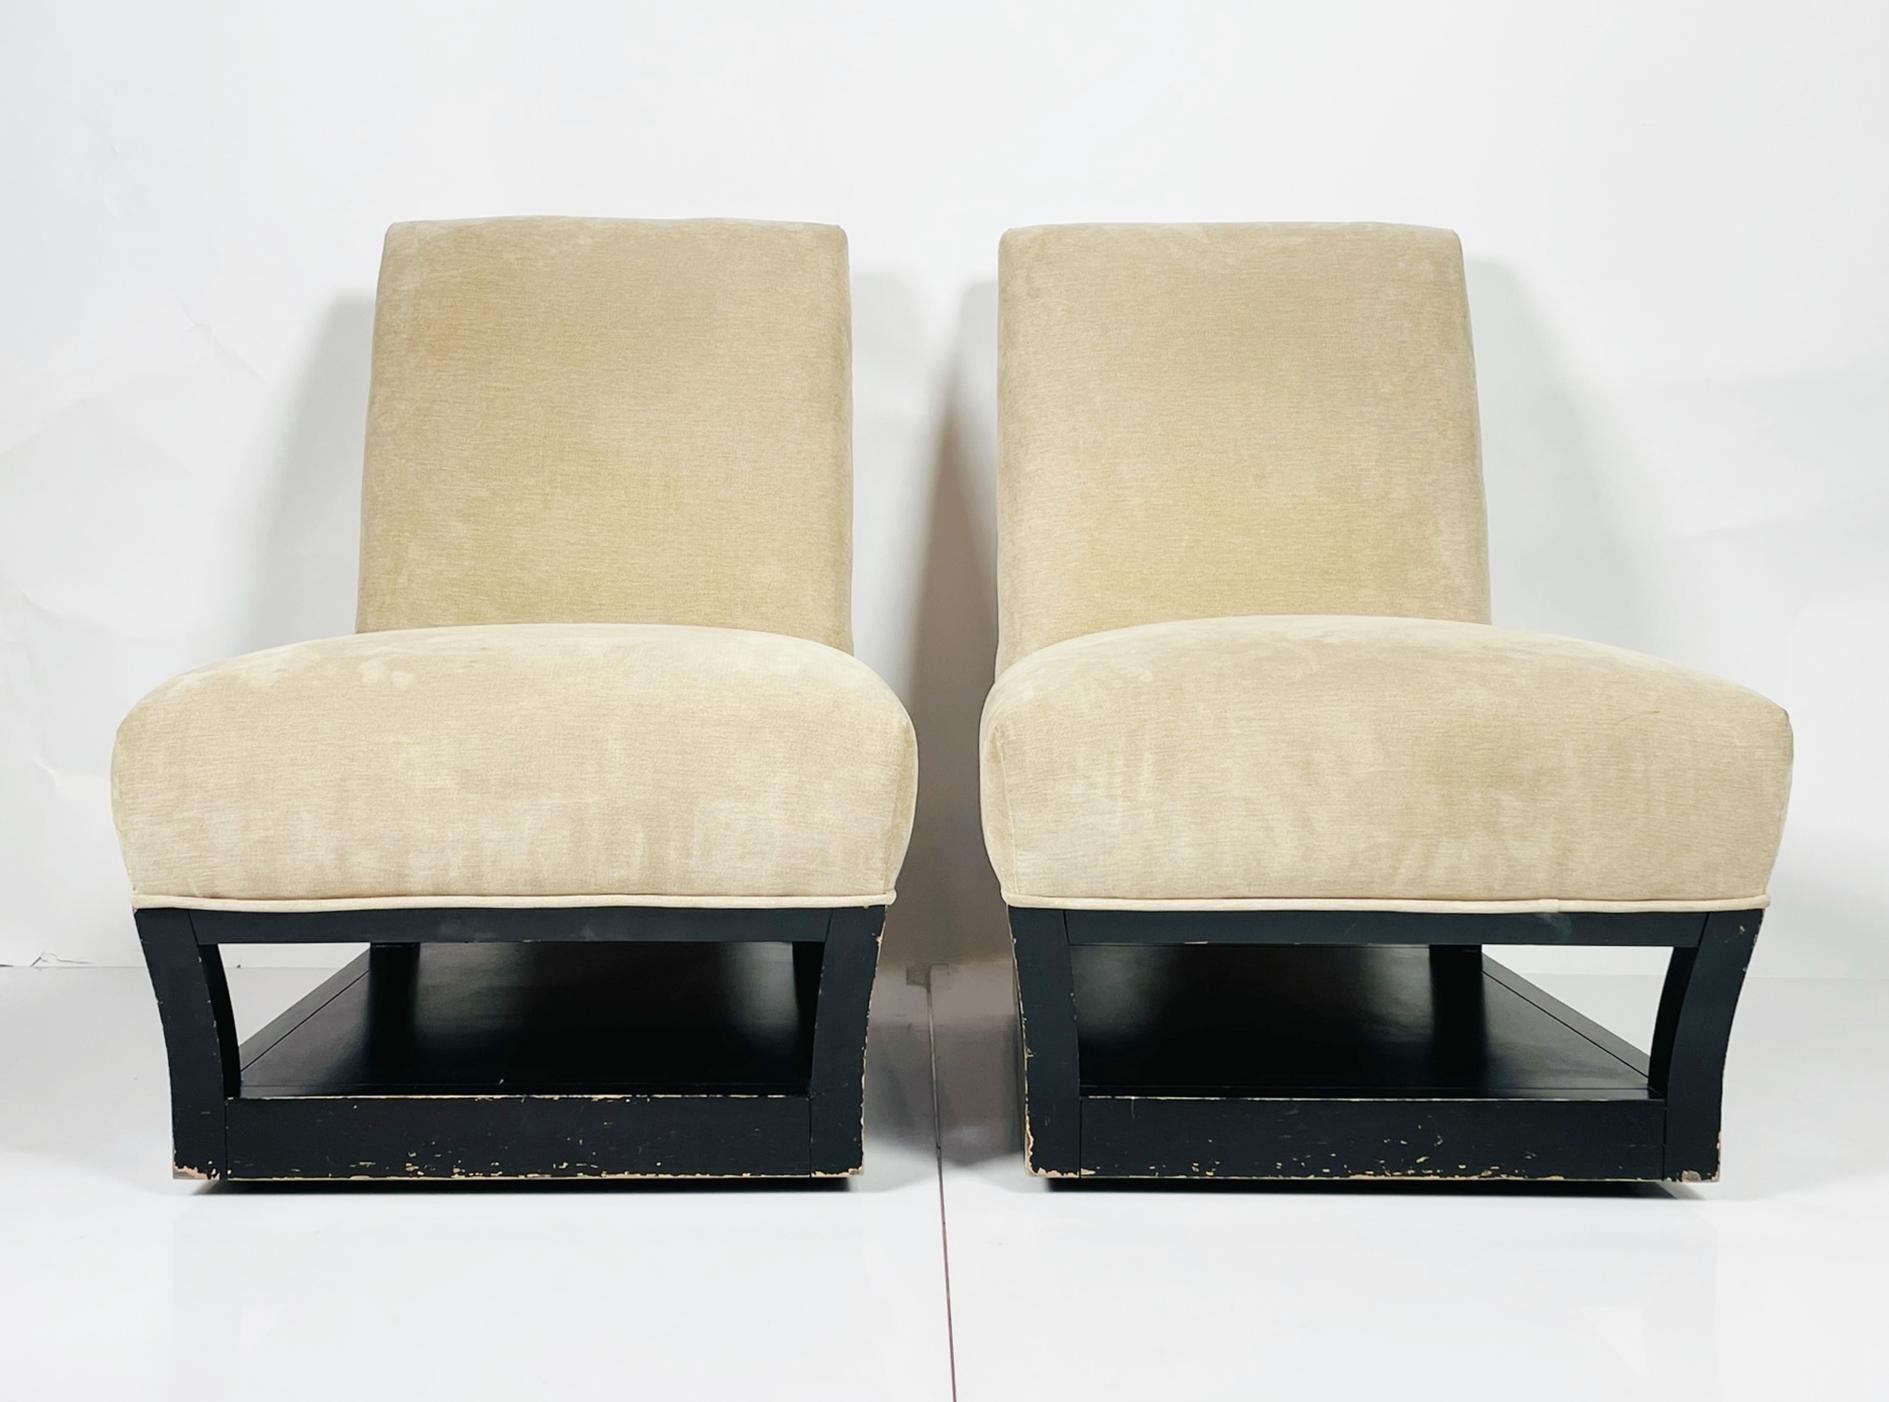 Beatiful pair of slipper chairs designed by John Hutton and manufactured in the USA by Donghia.
The chairs have beautiful lines, the base has an integraded shelf that can be use as a magazine holder or even as a shoe storage when the chairs are